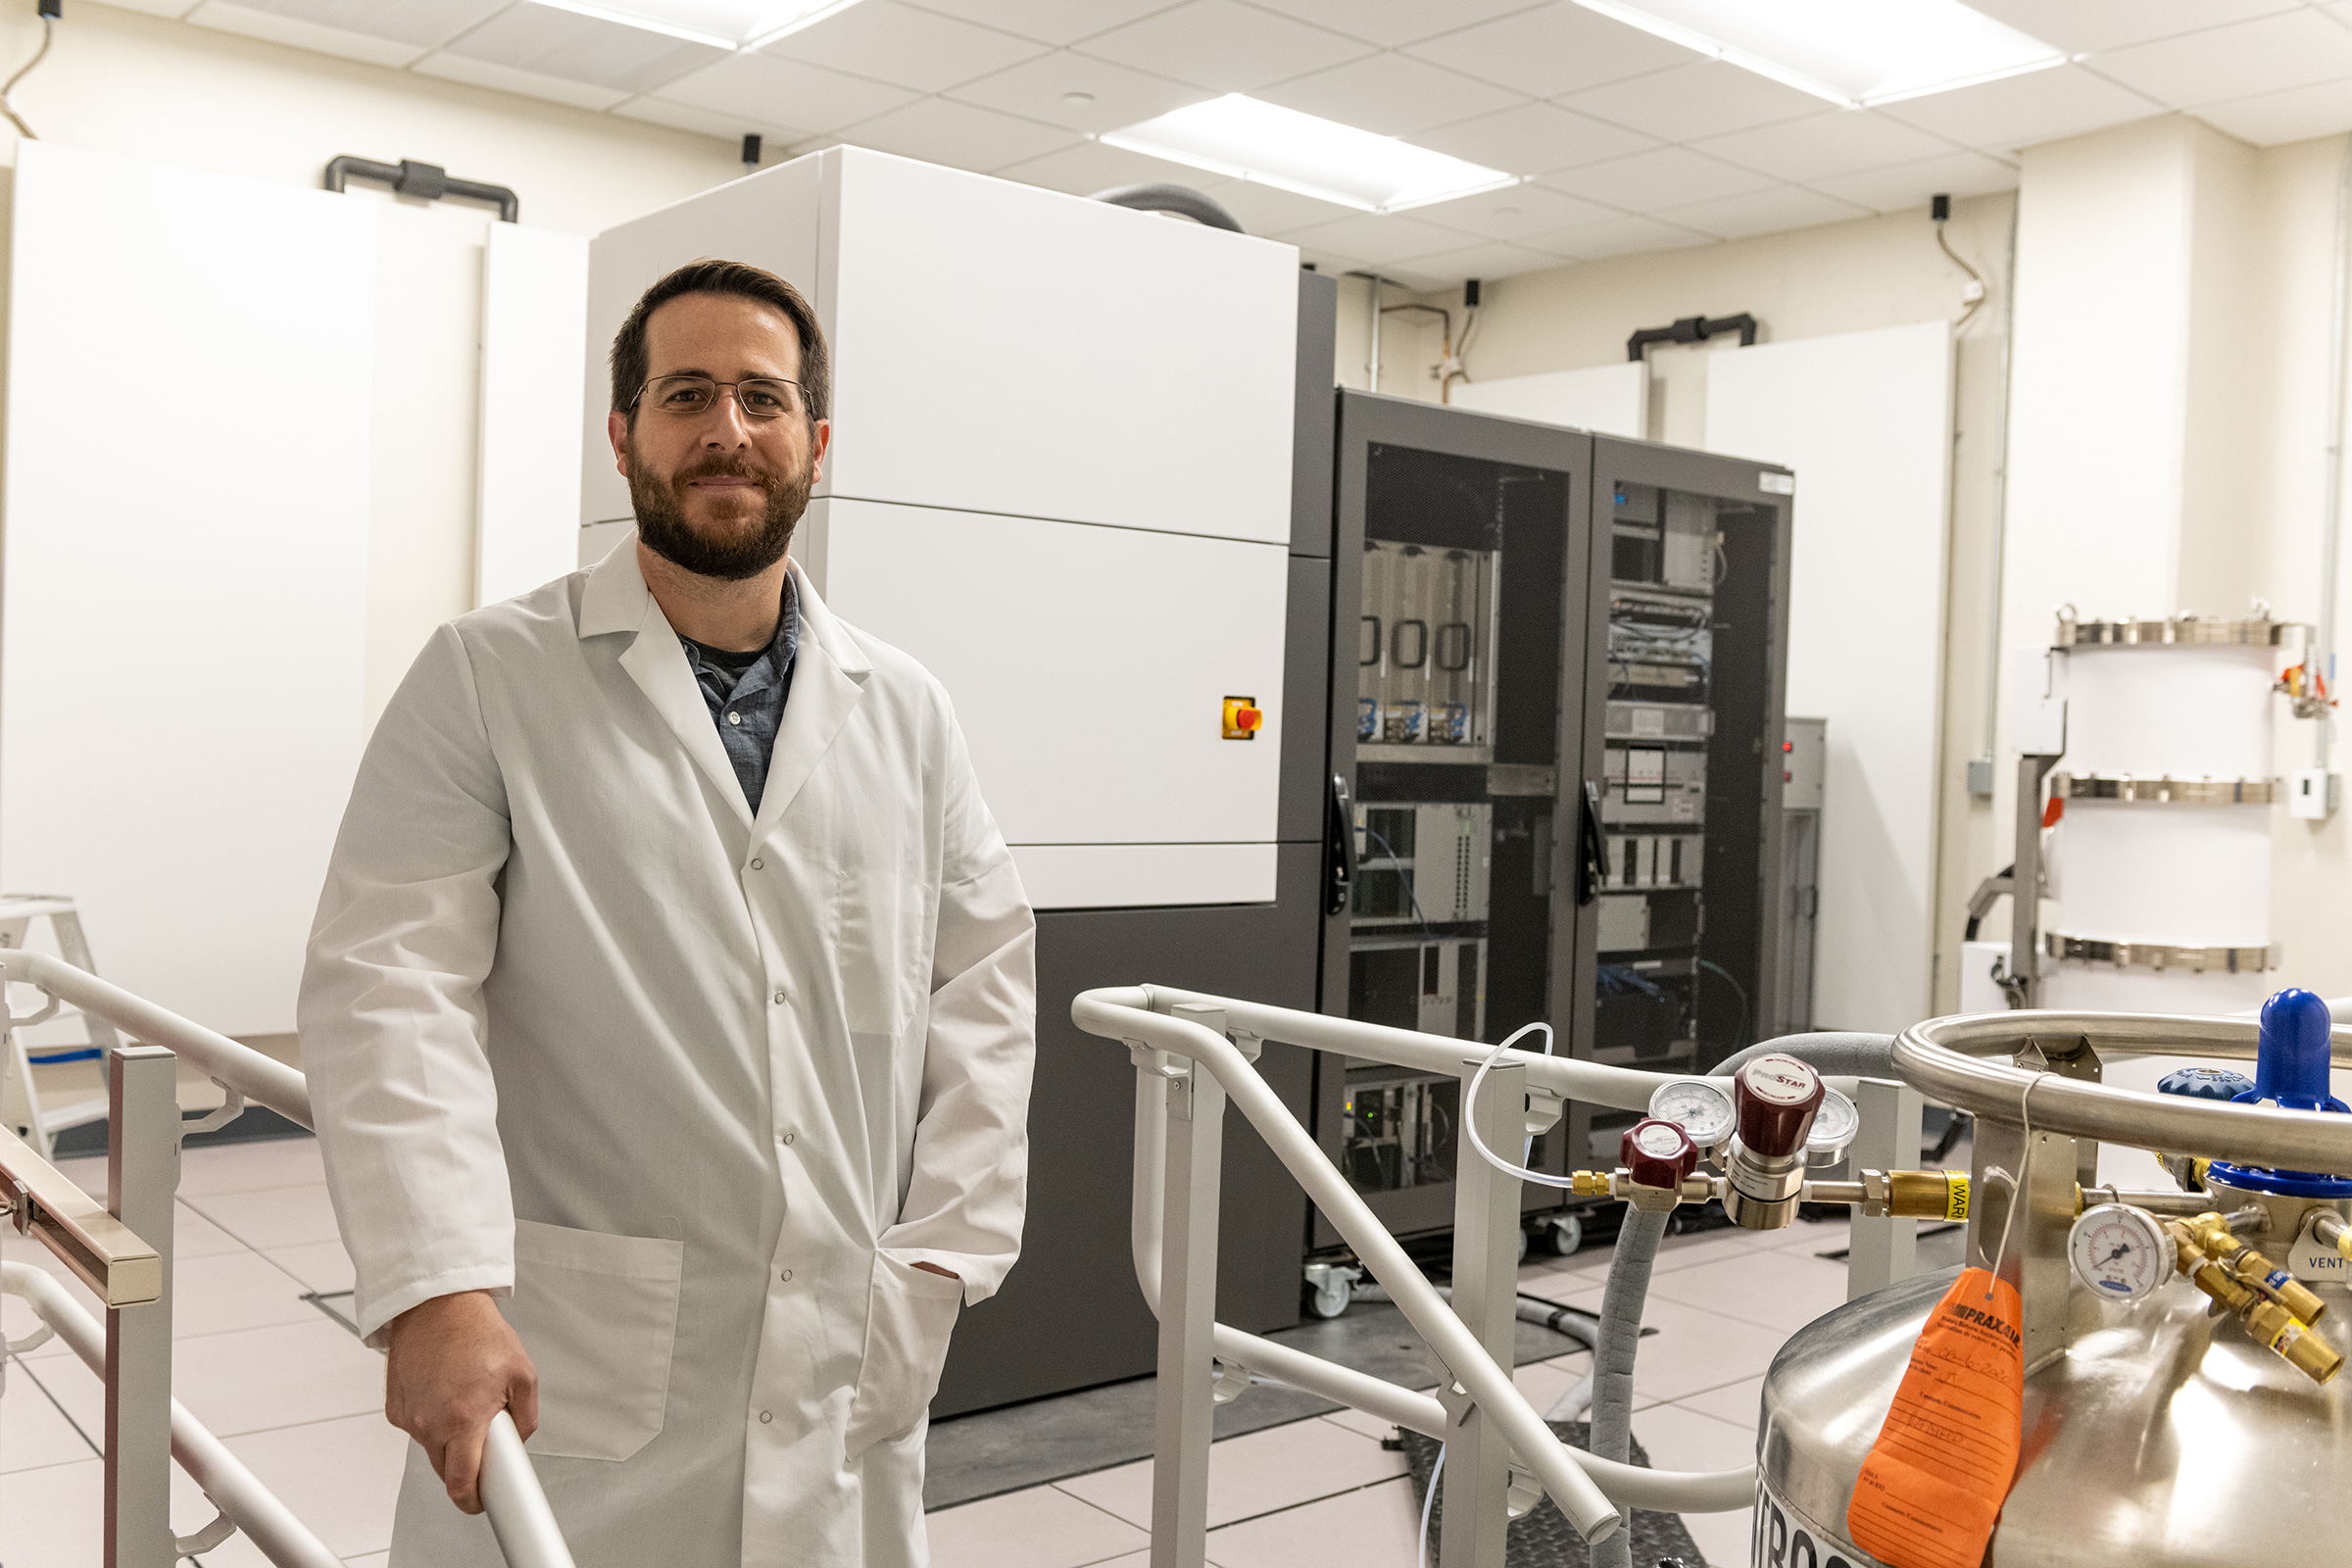 Man in a white lab coat standing in front of scientific equipment